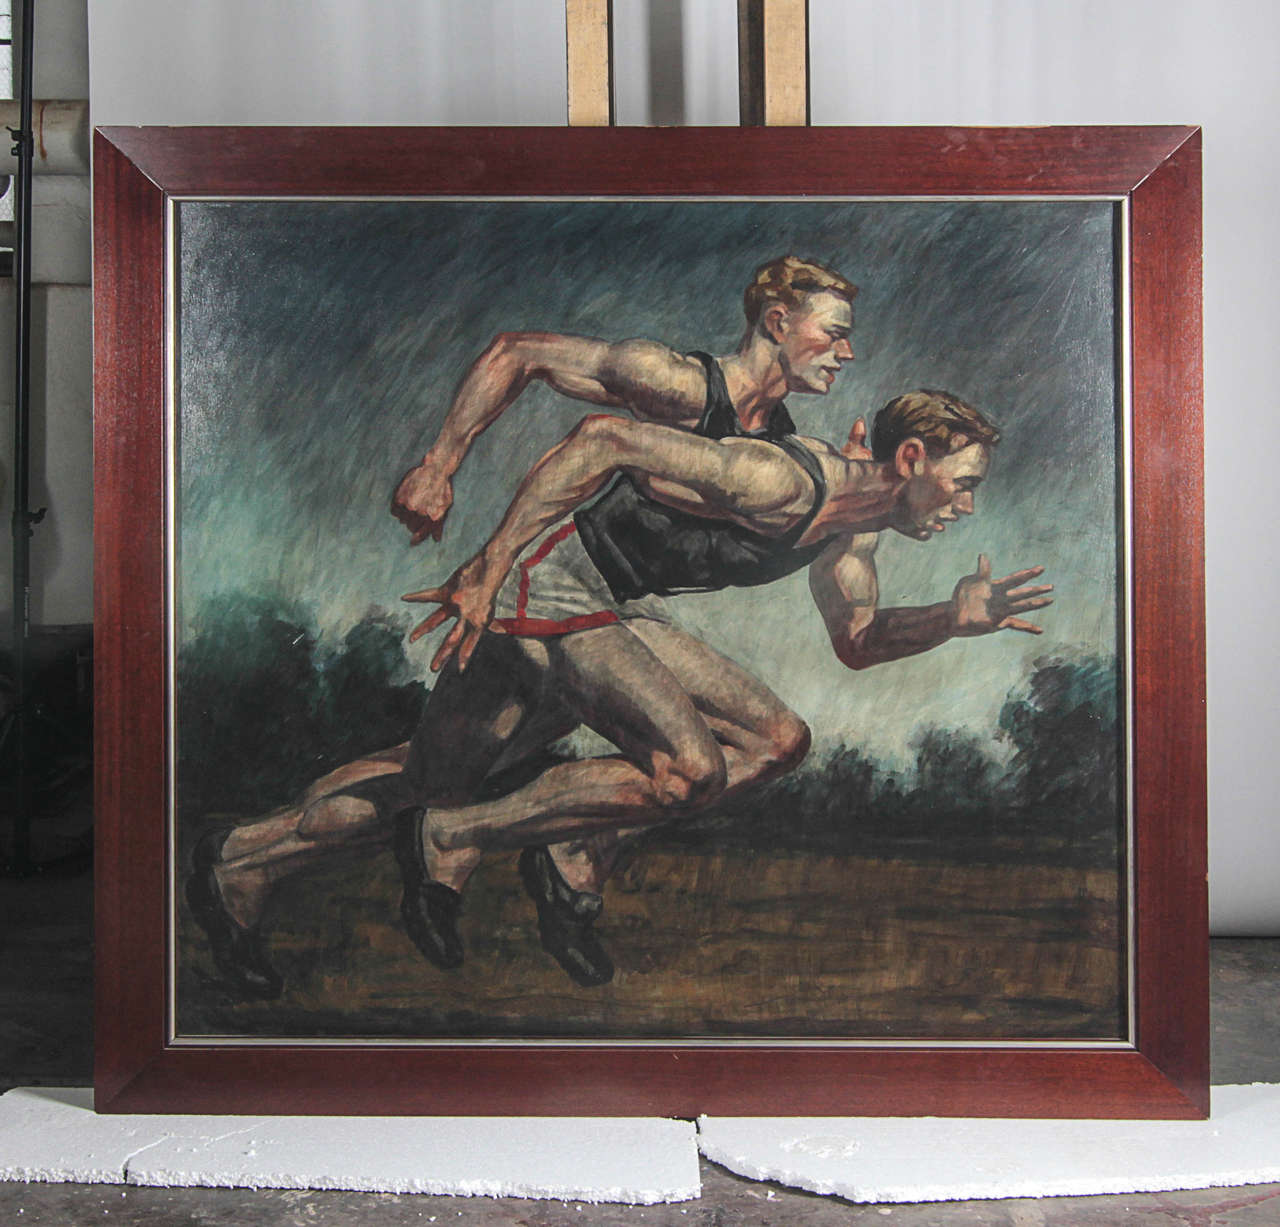 Oil on canvas painting of two athletes running. Signed upper right: B Sargent. Canvas size: 60